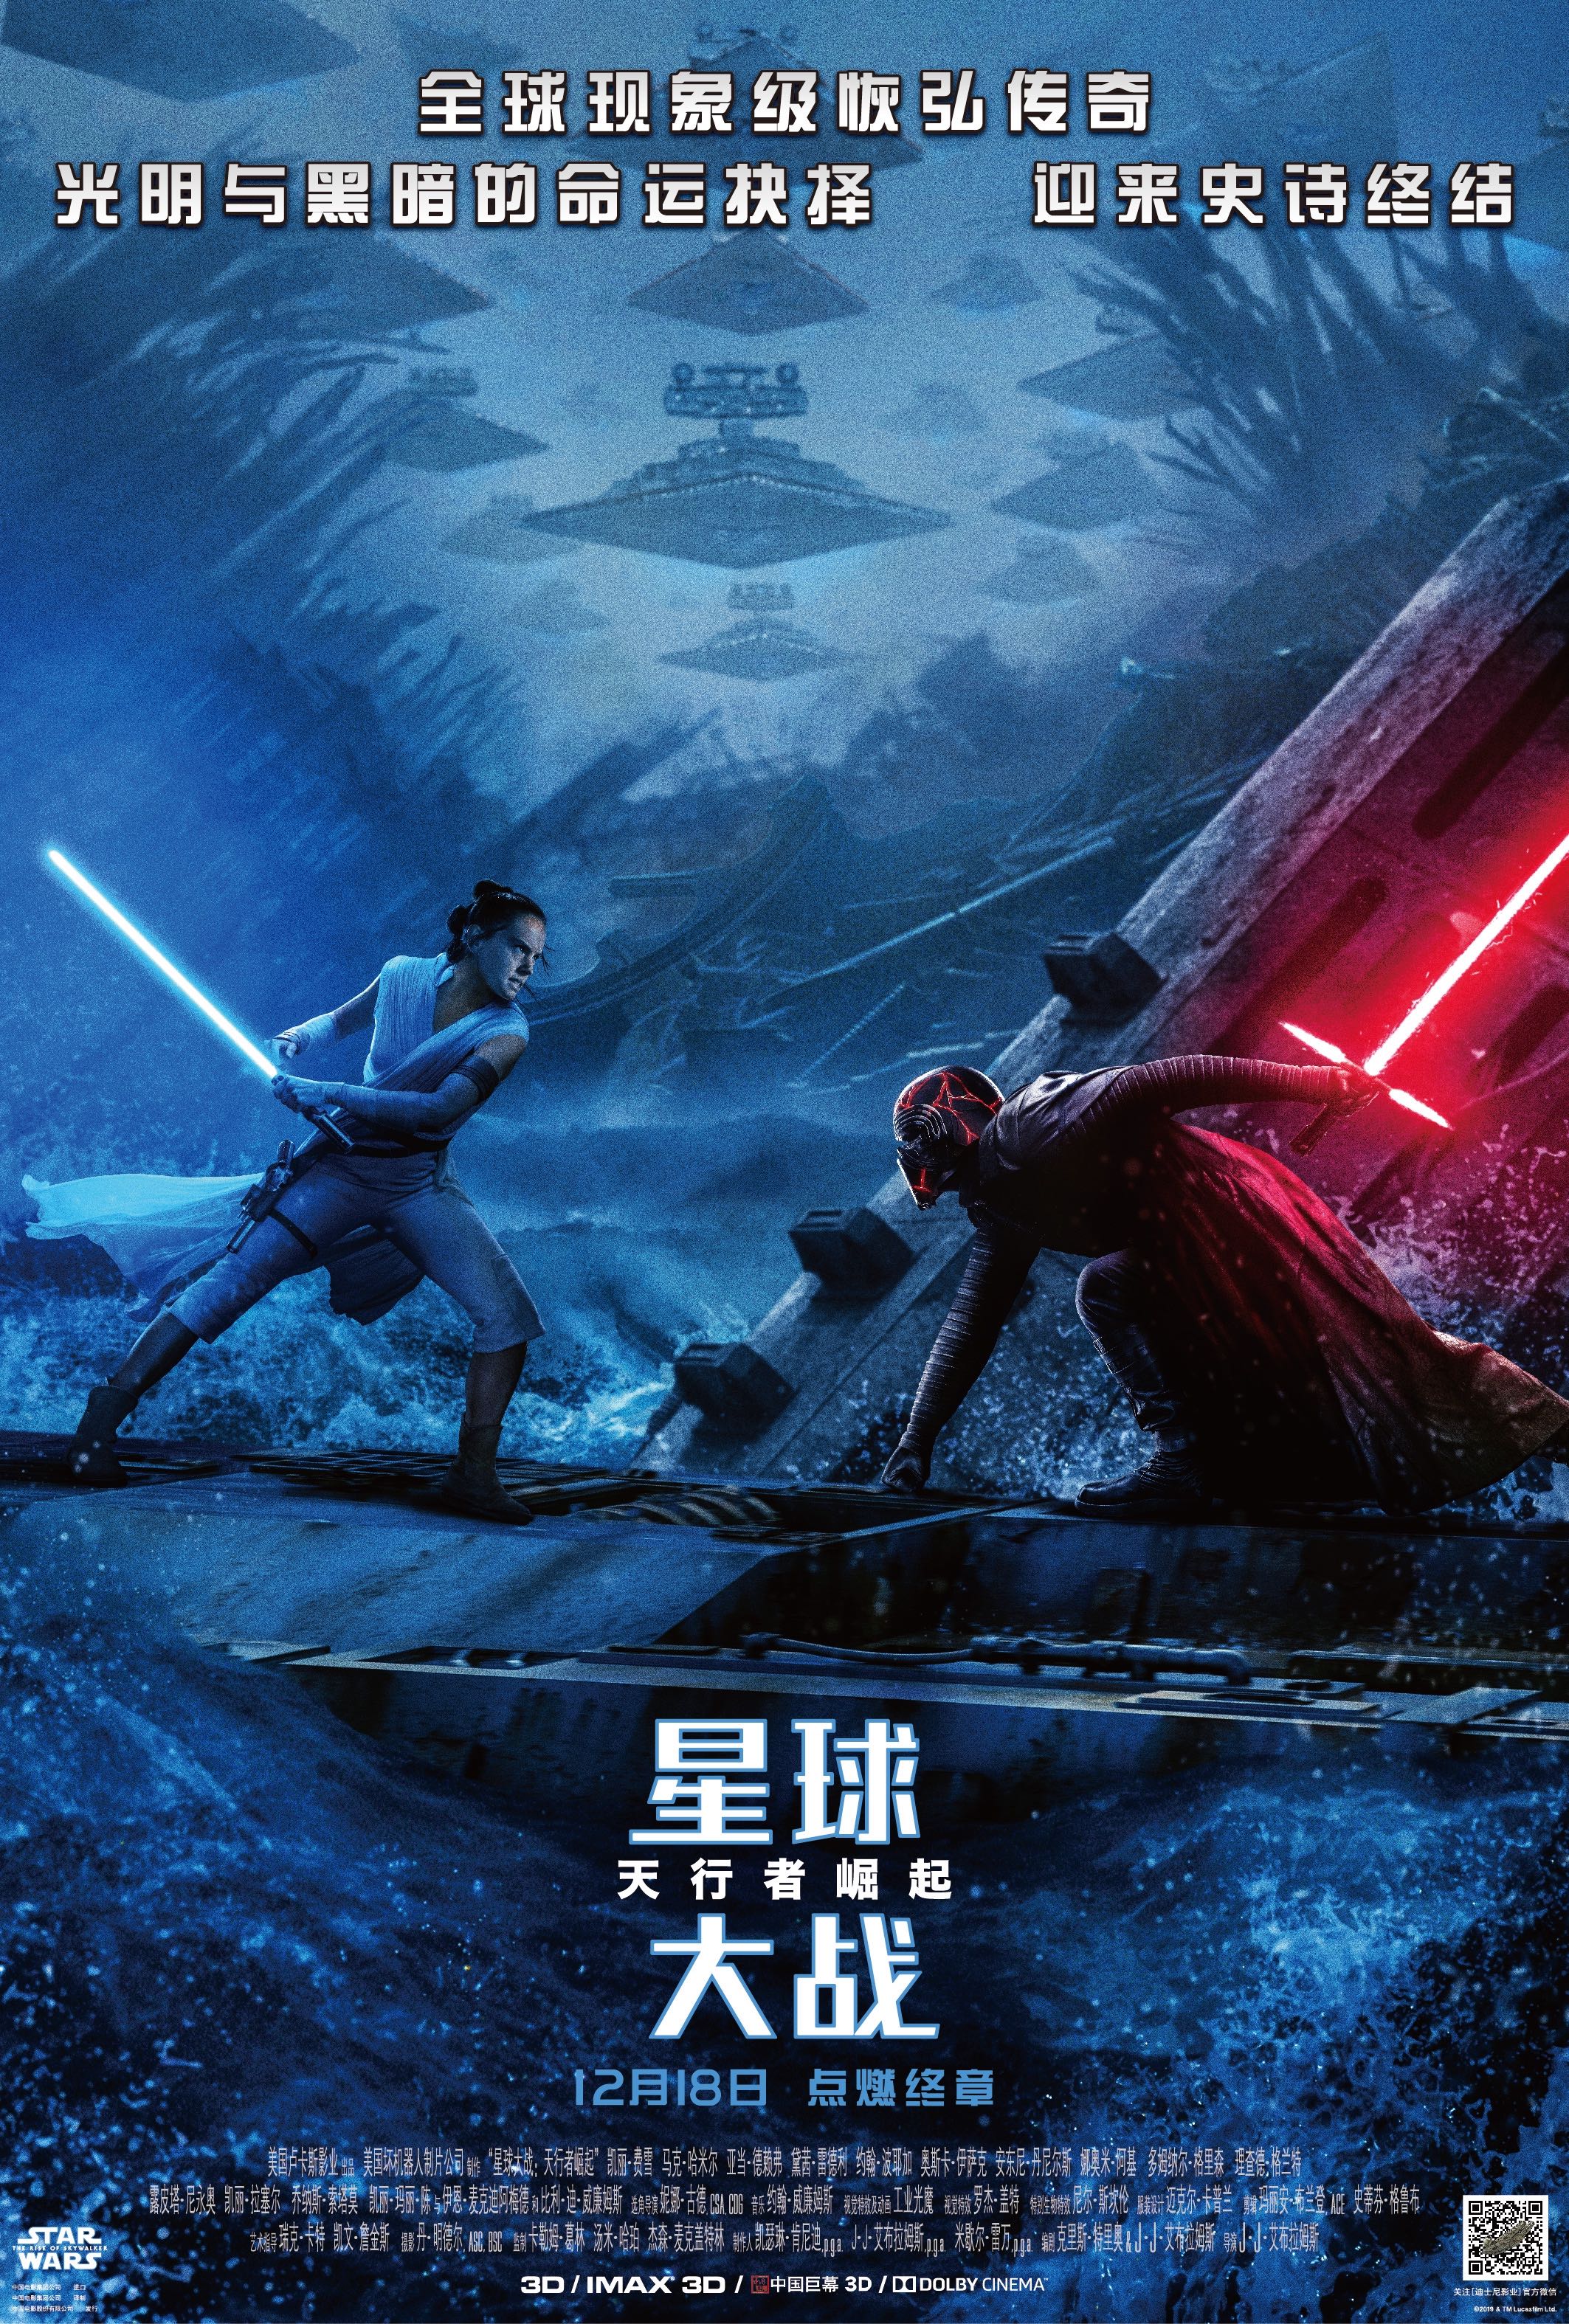 Star Wars on Twitter: "Check out the Chinese poster for #StarWars: #TheRiseOfSkywalker. See it in theaters in 5 days! https://t.co/UVb7kdgAEv" /